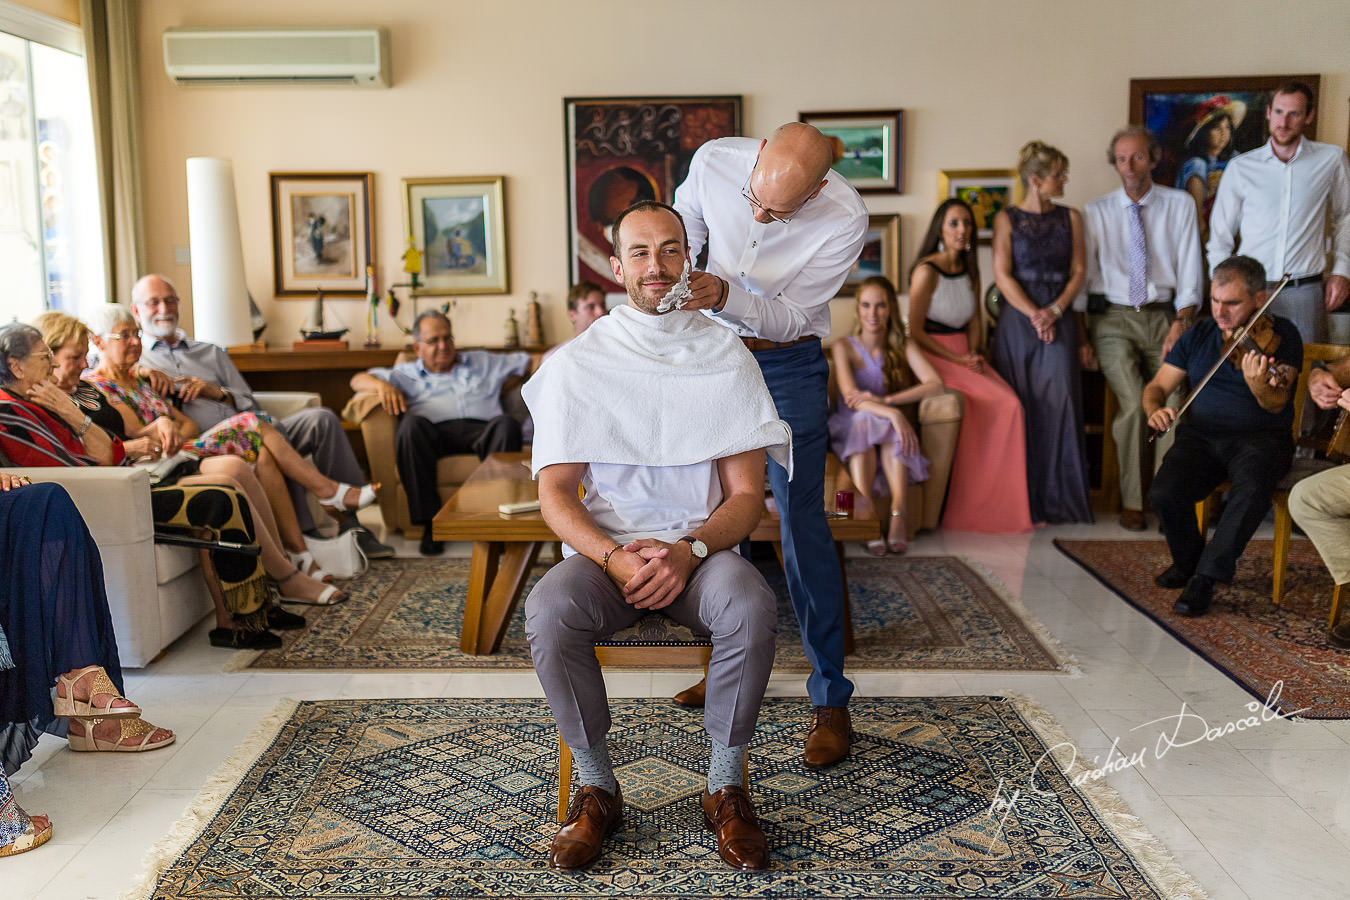 Groom's preparations captured by Cyprus Photographer Cristian Dascalu during a lovely wedding at St. Raphael Resort in Limassol, Cyprus.